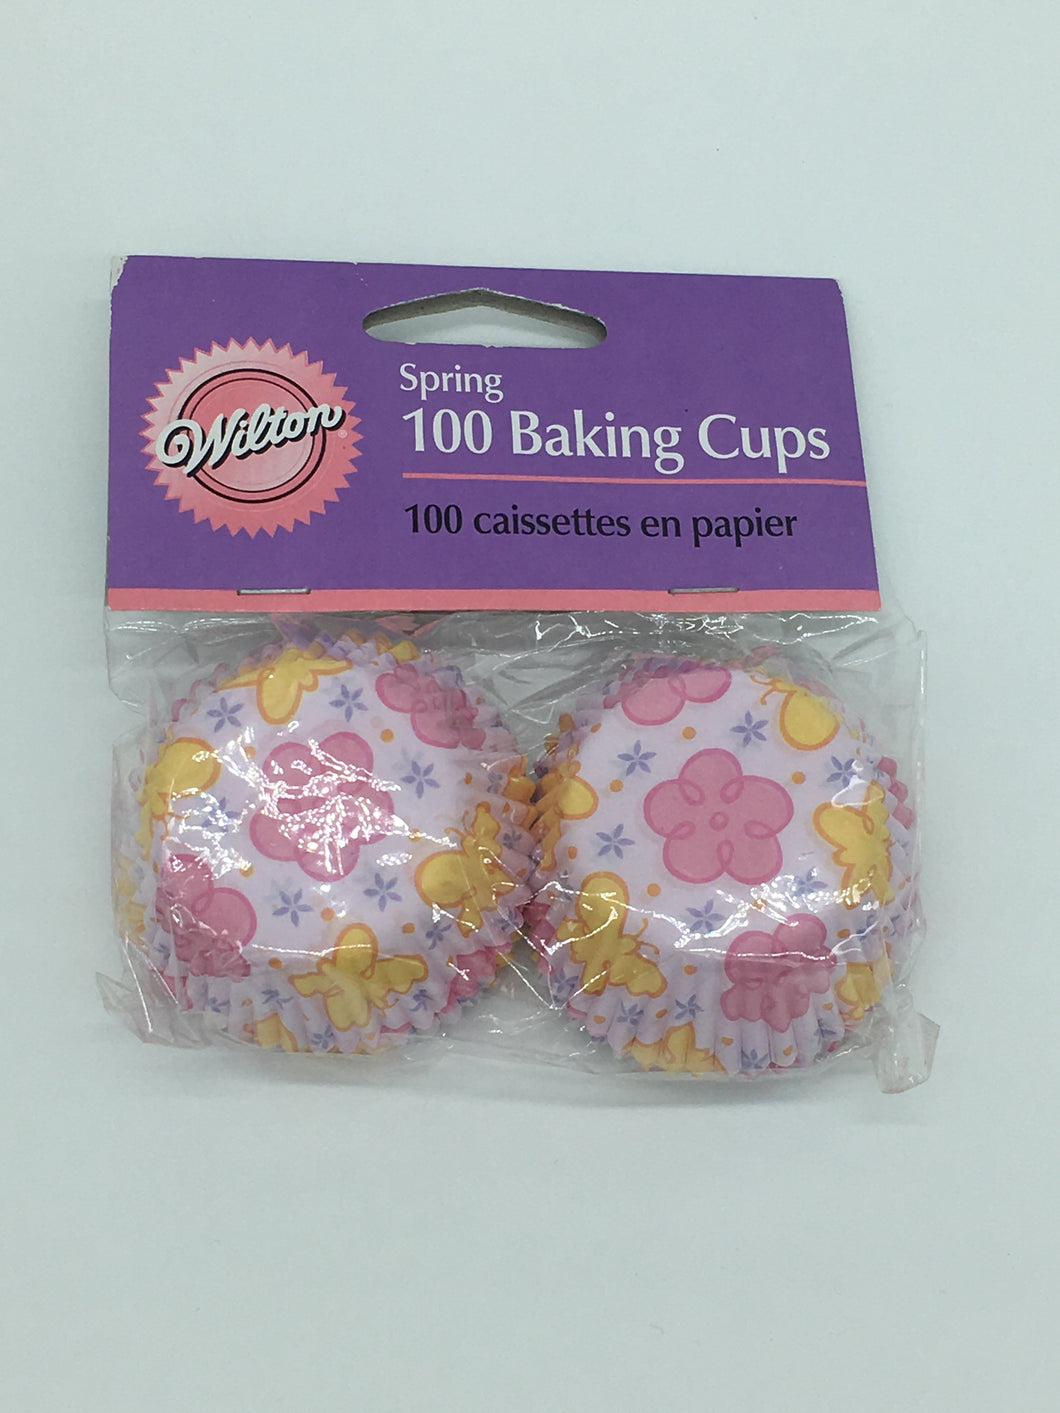 BAKING CUPS - SPRING